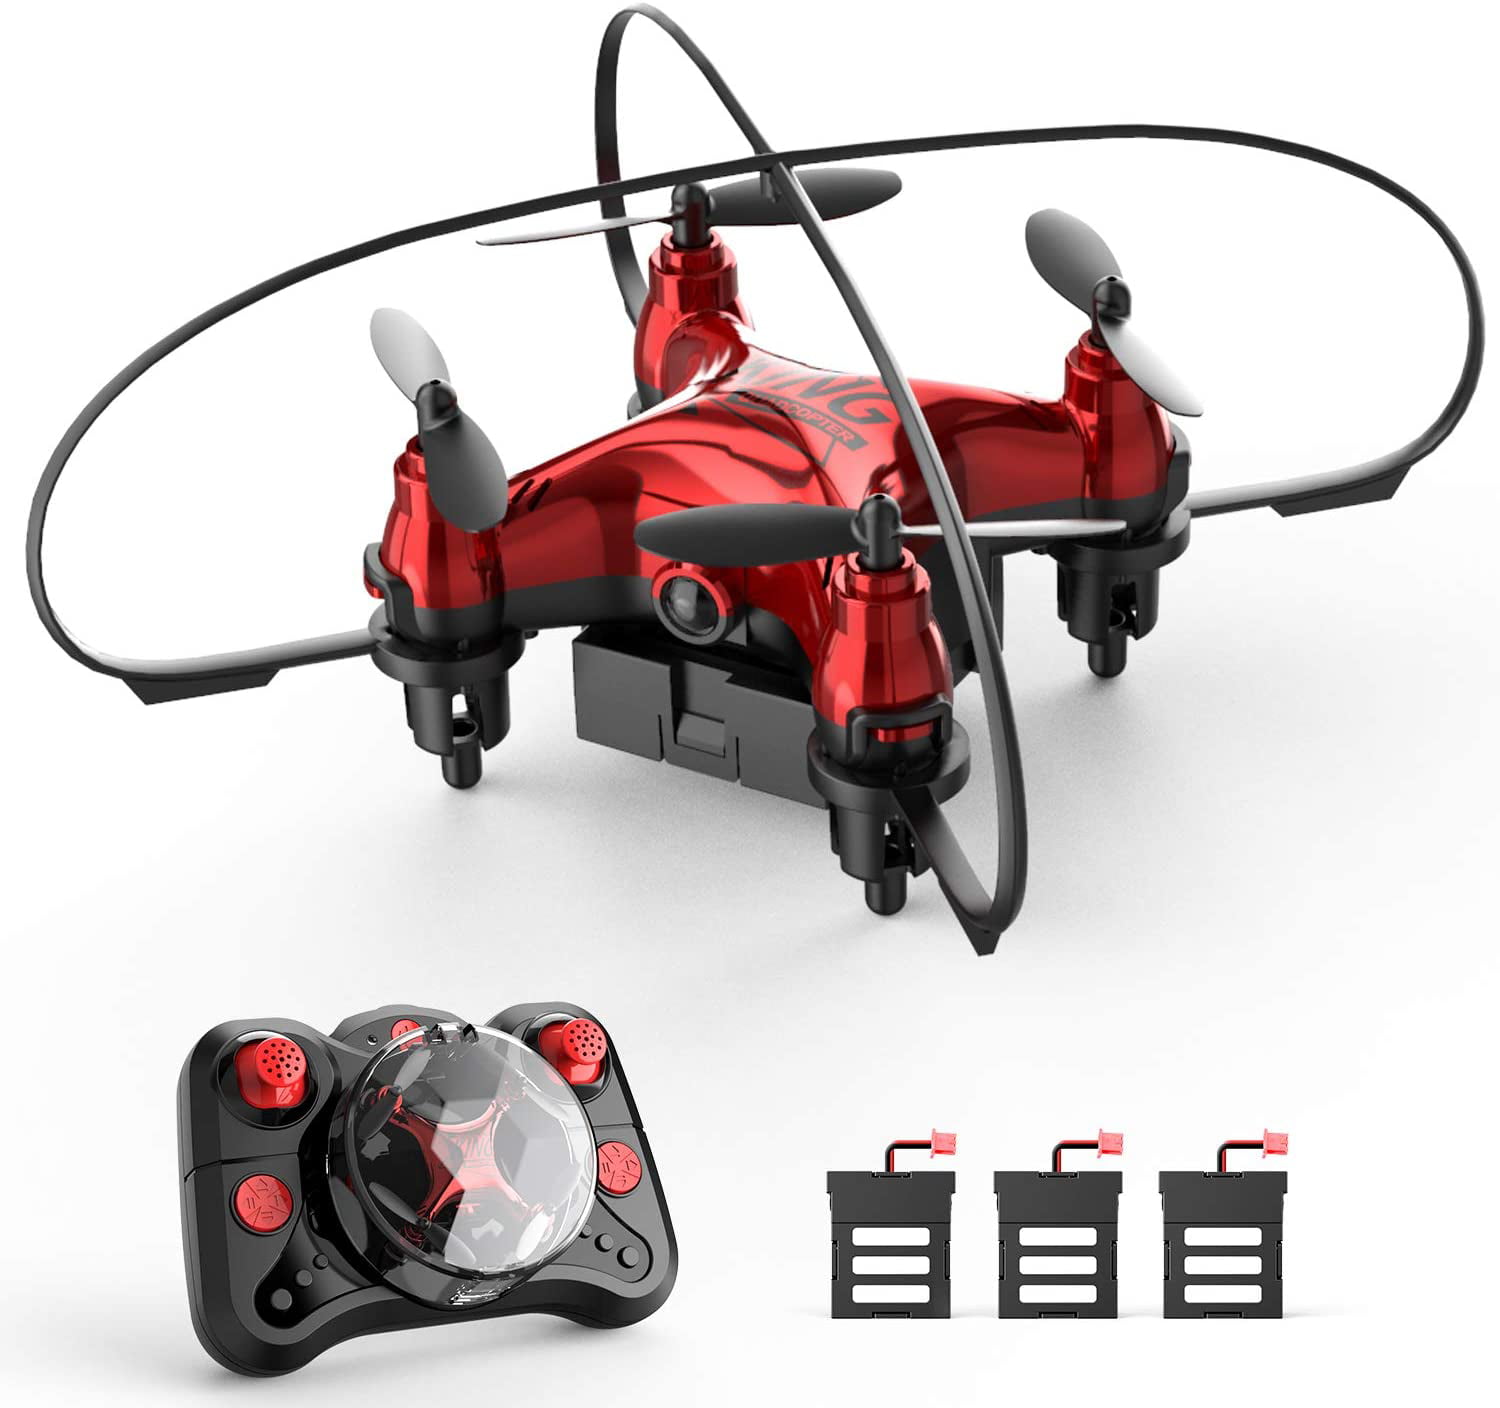 Mini Drone Small Pocket Drone Quadcopter 3D Roll Helicopter Kids Remote Control